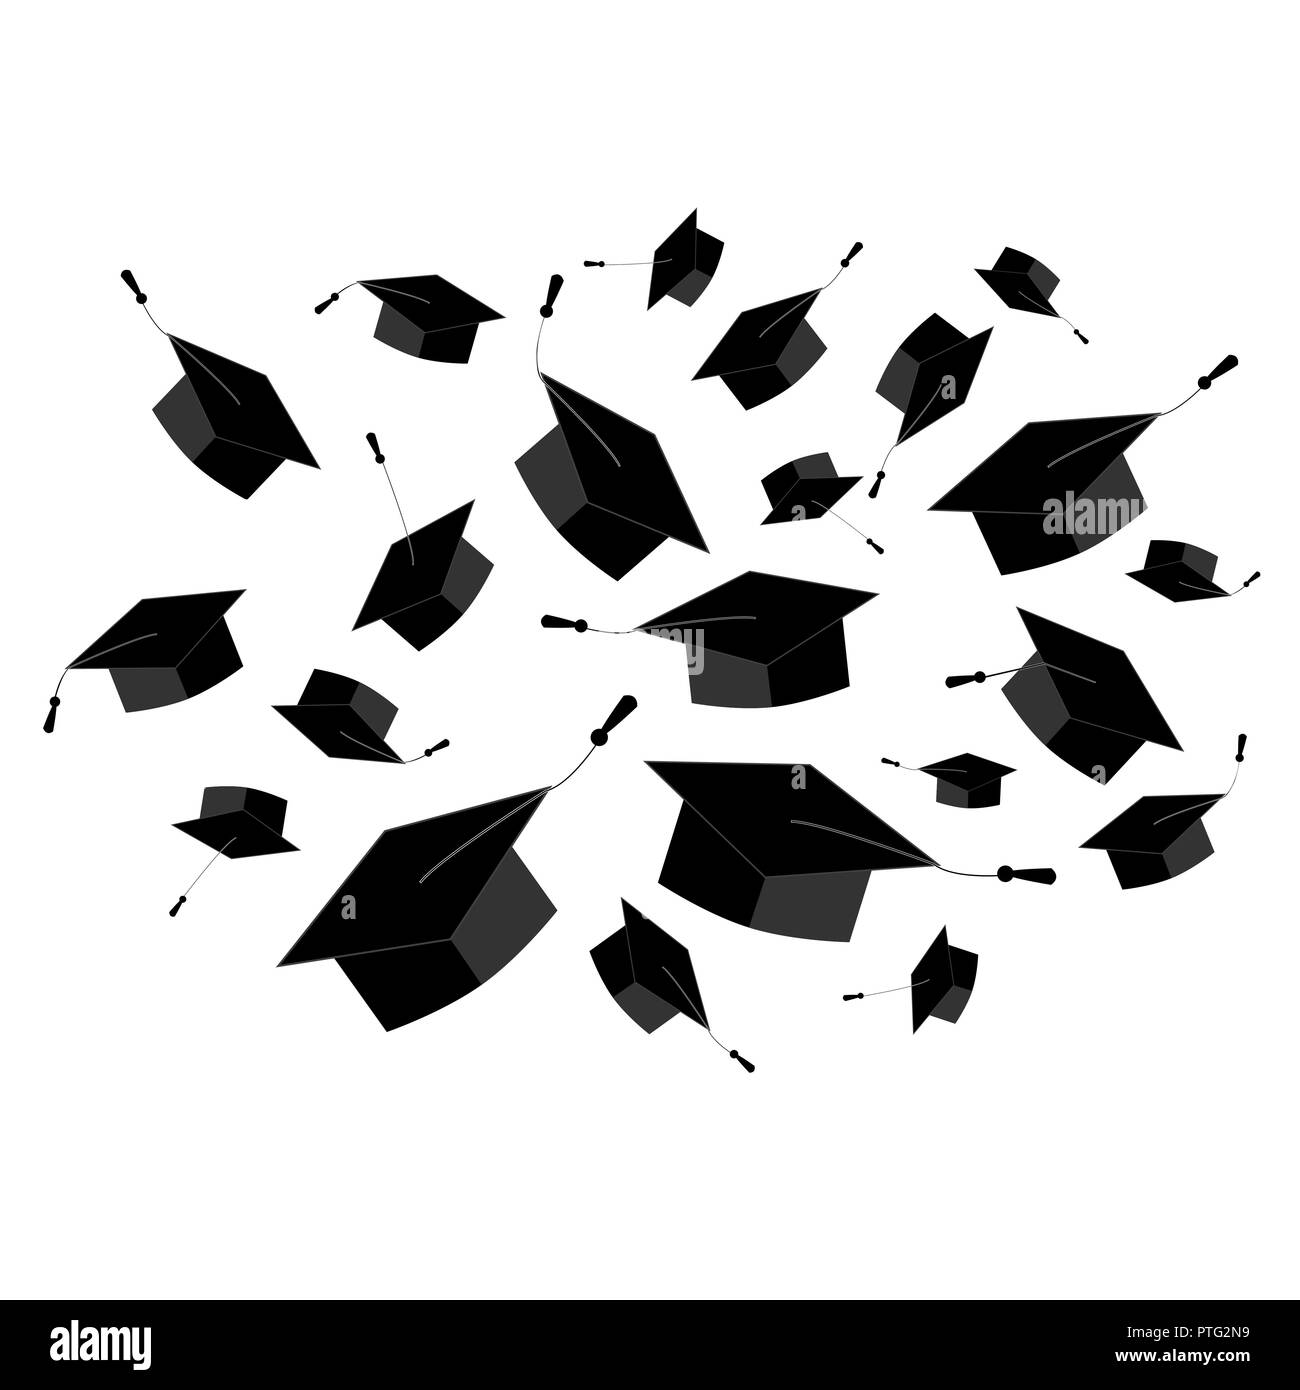 Graduation caps fly in the air in a moment of celebration. Abstract cloud element for graduation ceremony design. Vector illustration, black and white Stock Vector